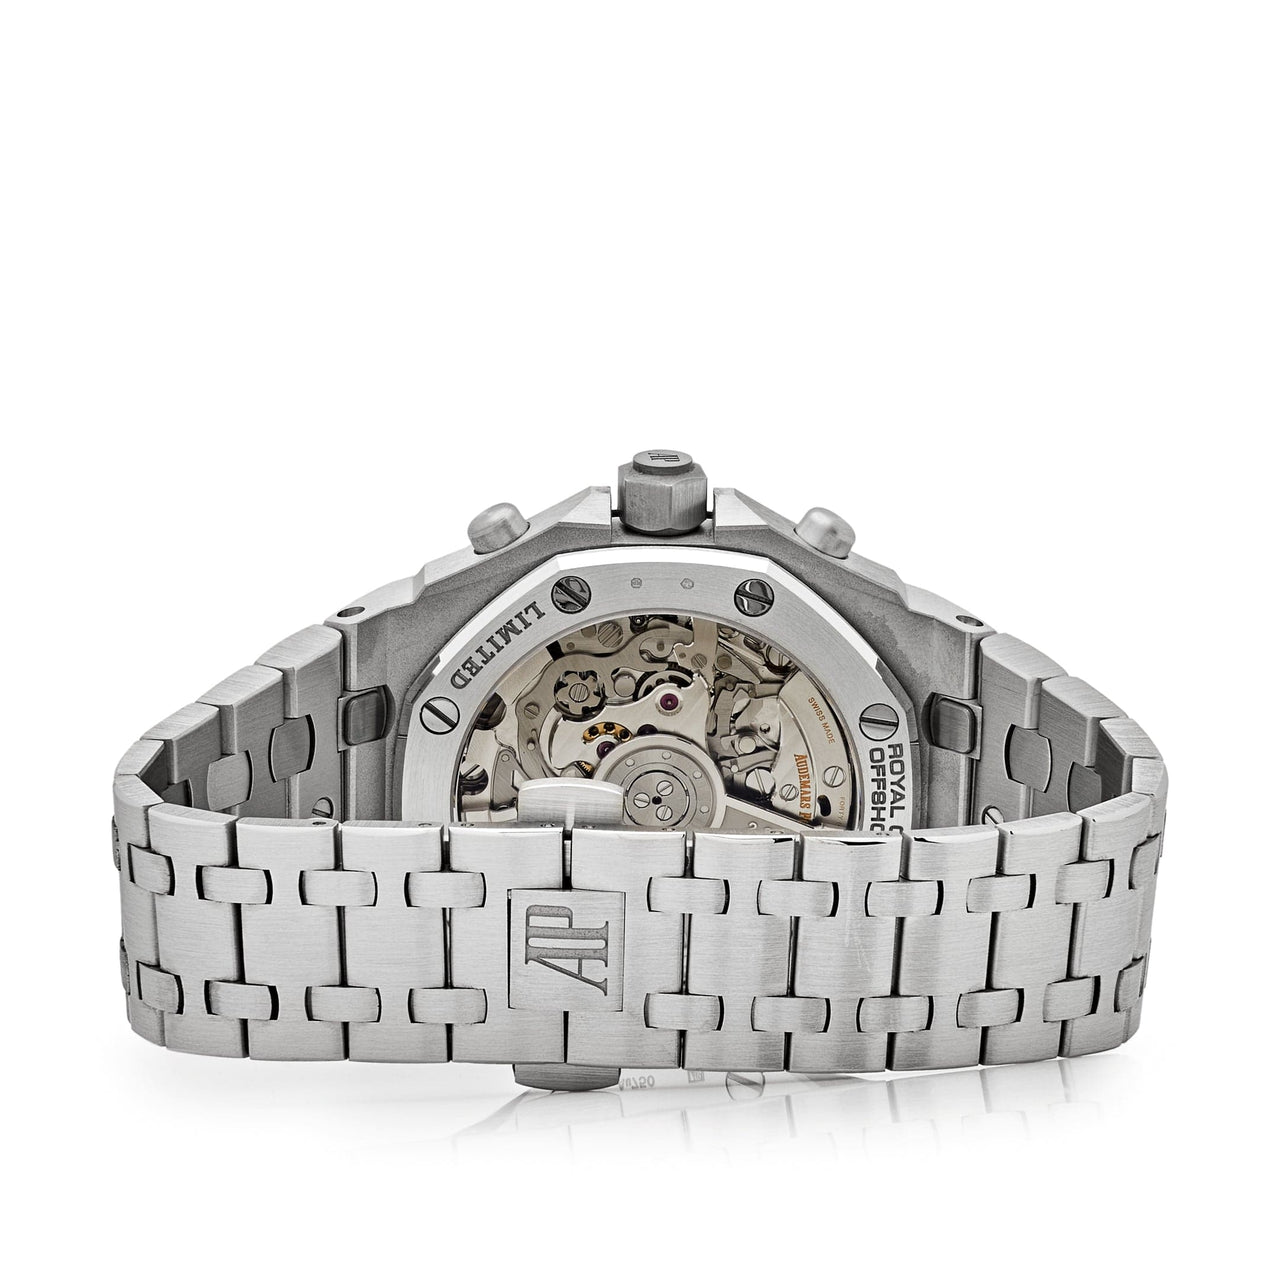 Audemars Piguet Royal Oak Offshore Selfwinding Chronograph 26238BC.OO.2000BC.01  White Gold Limited Edition (2024)